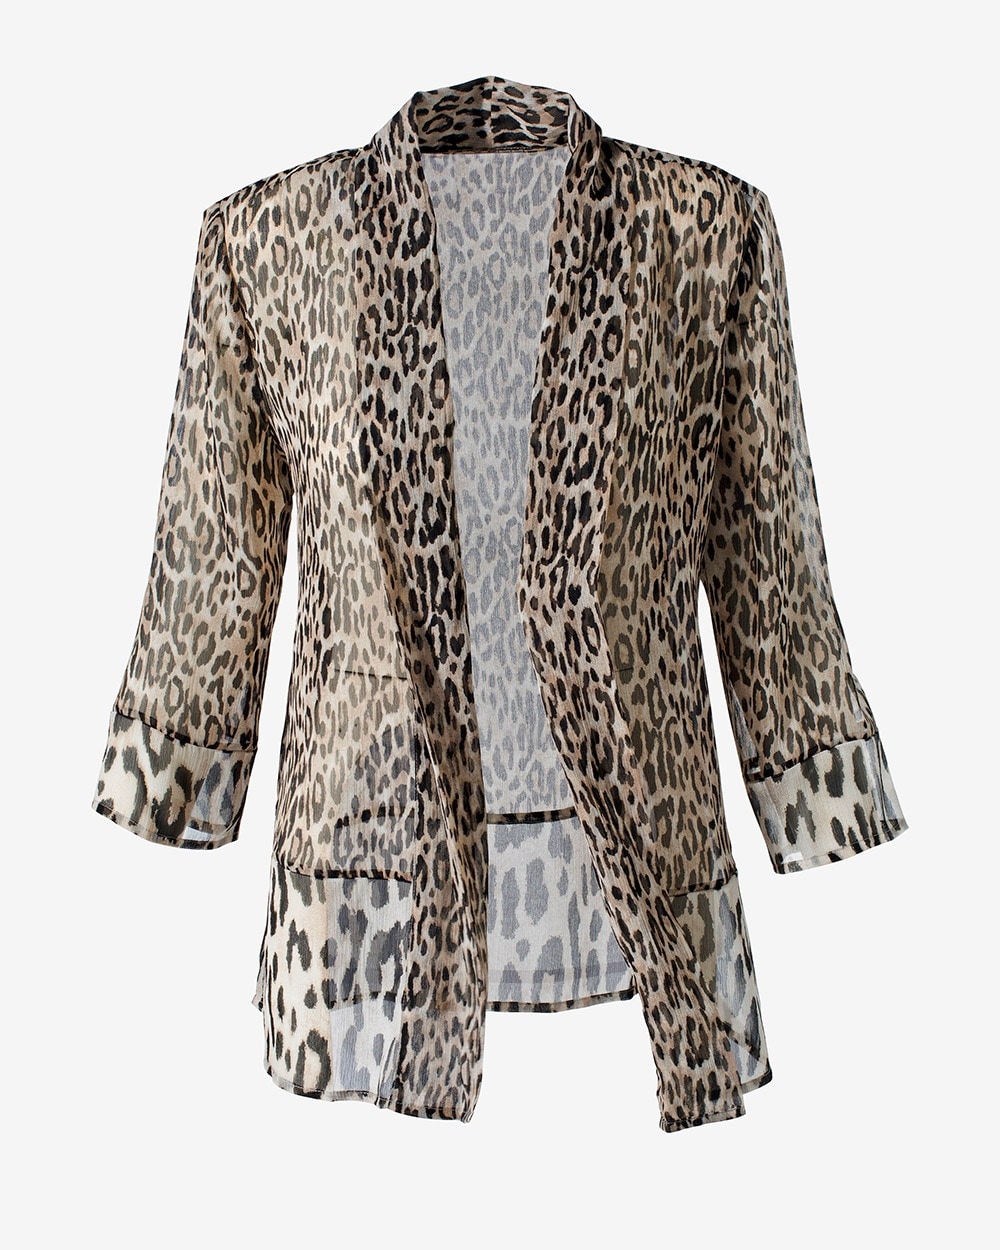 Sheer Leopard Drape-Front Jacket - Chico's Off The Rack - Chico's Outlet